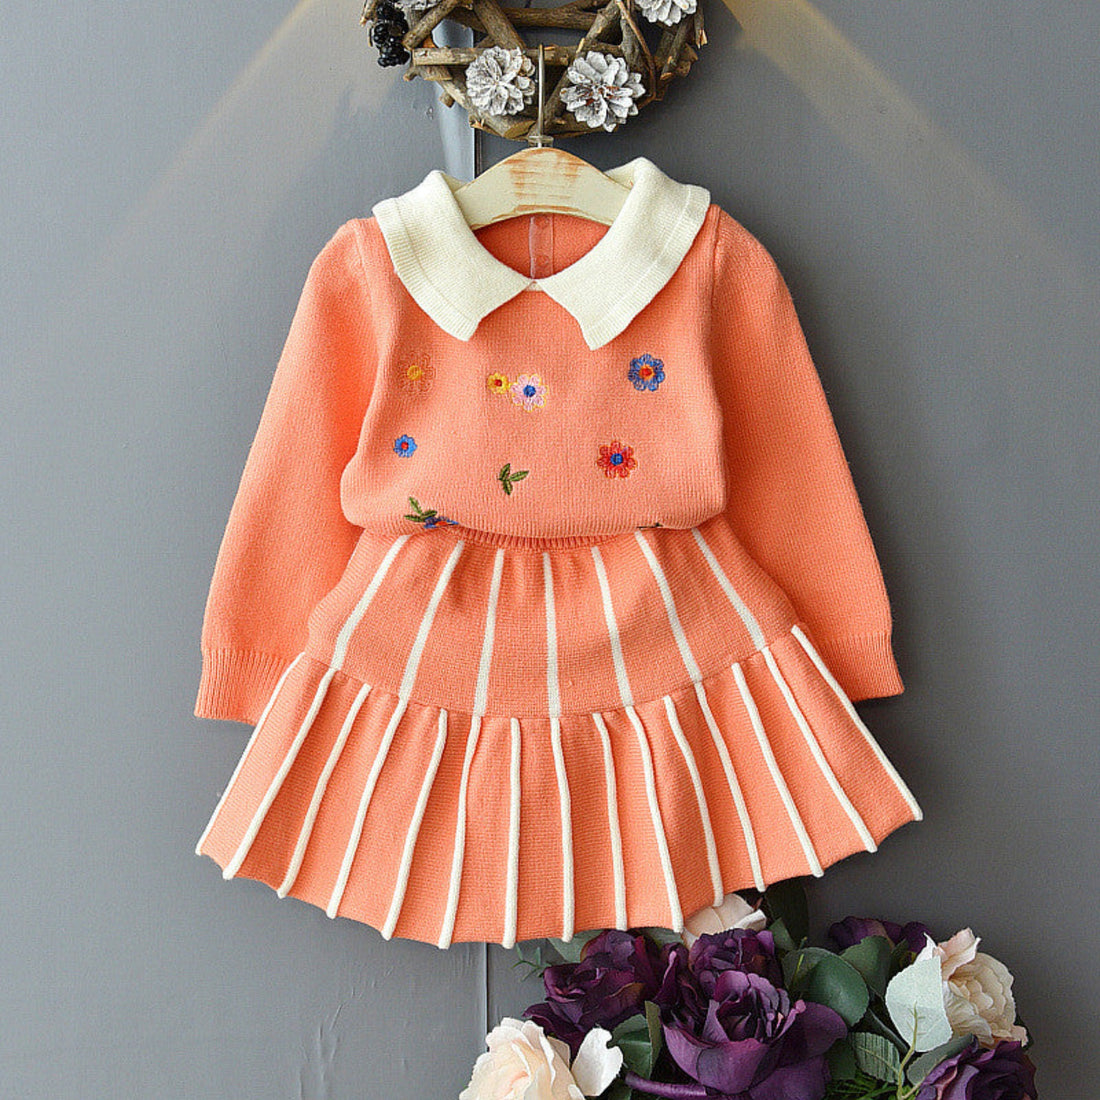 Close-up of an adorable girls outfit set with matching top and bottoms.